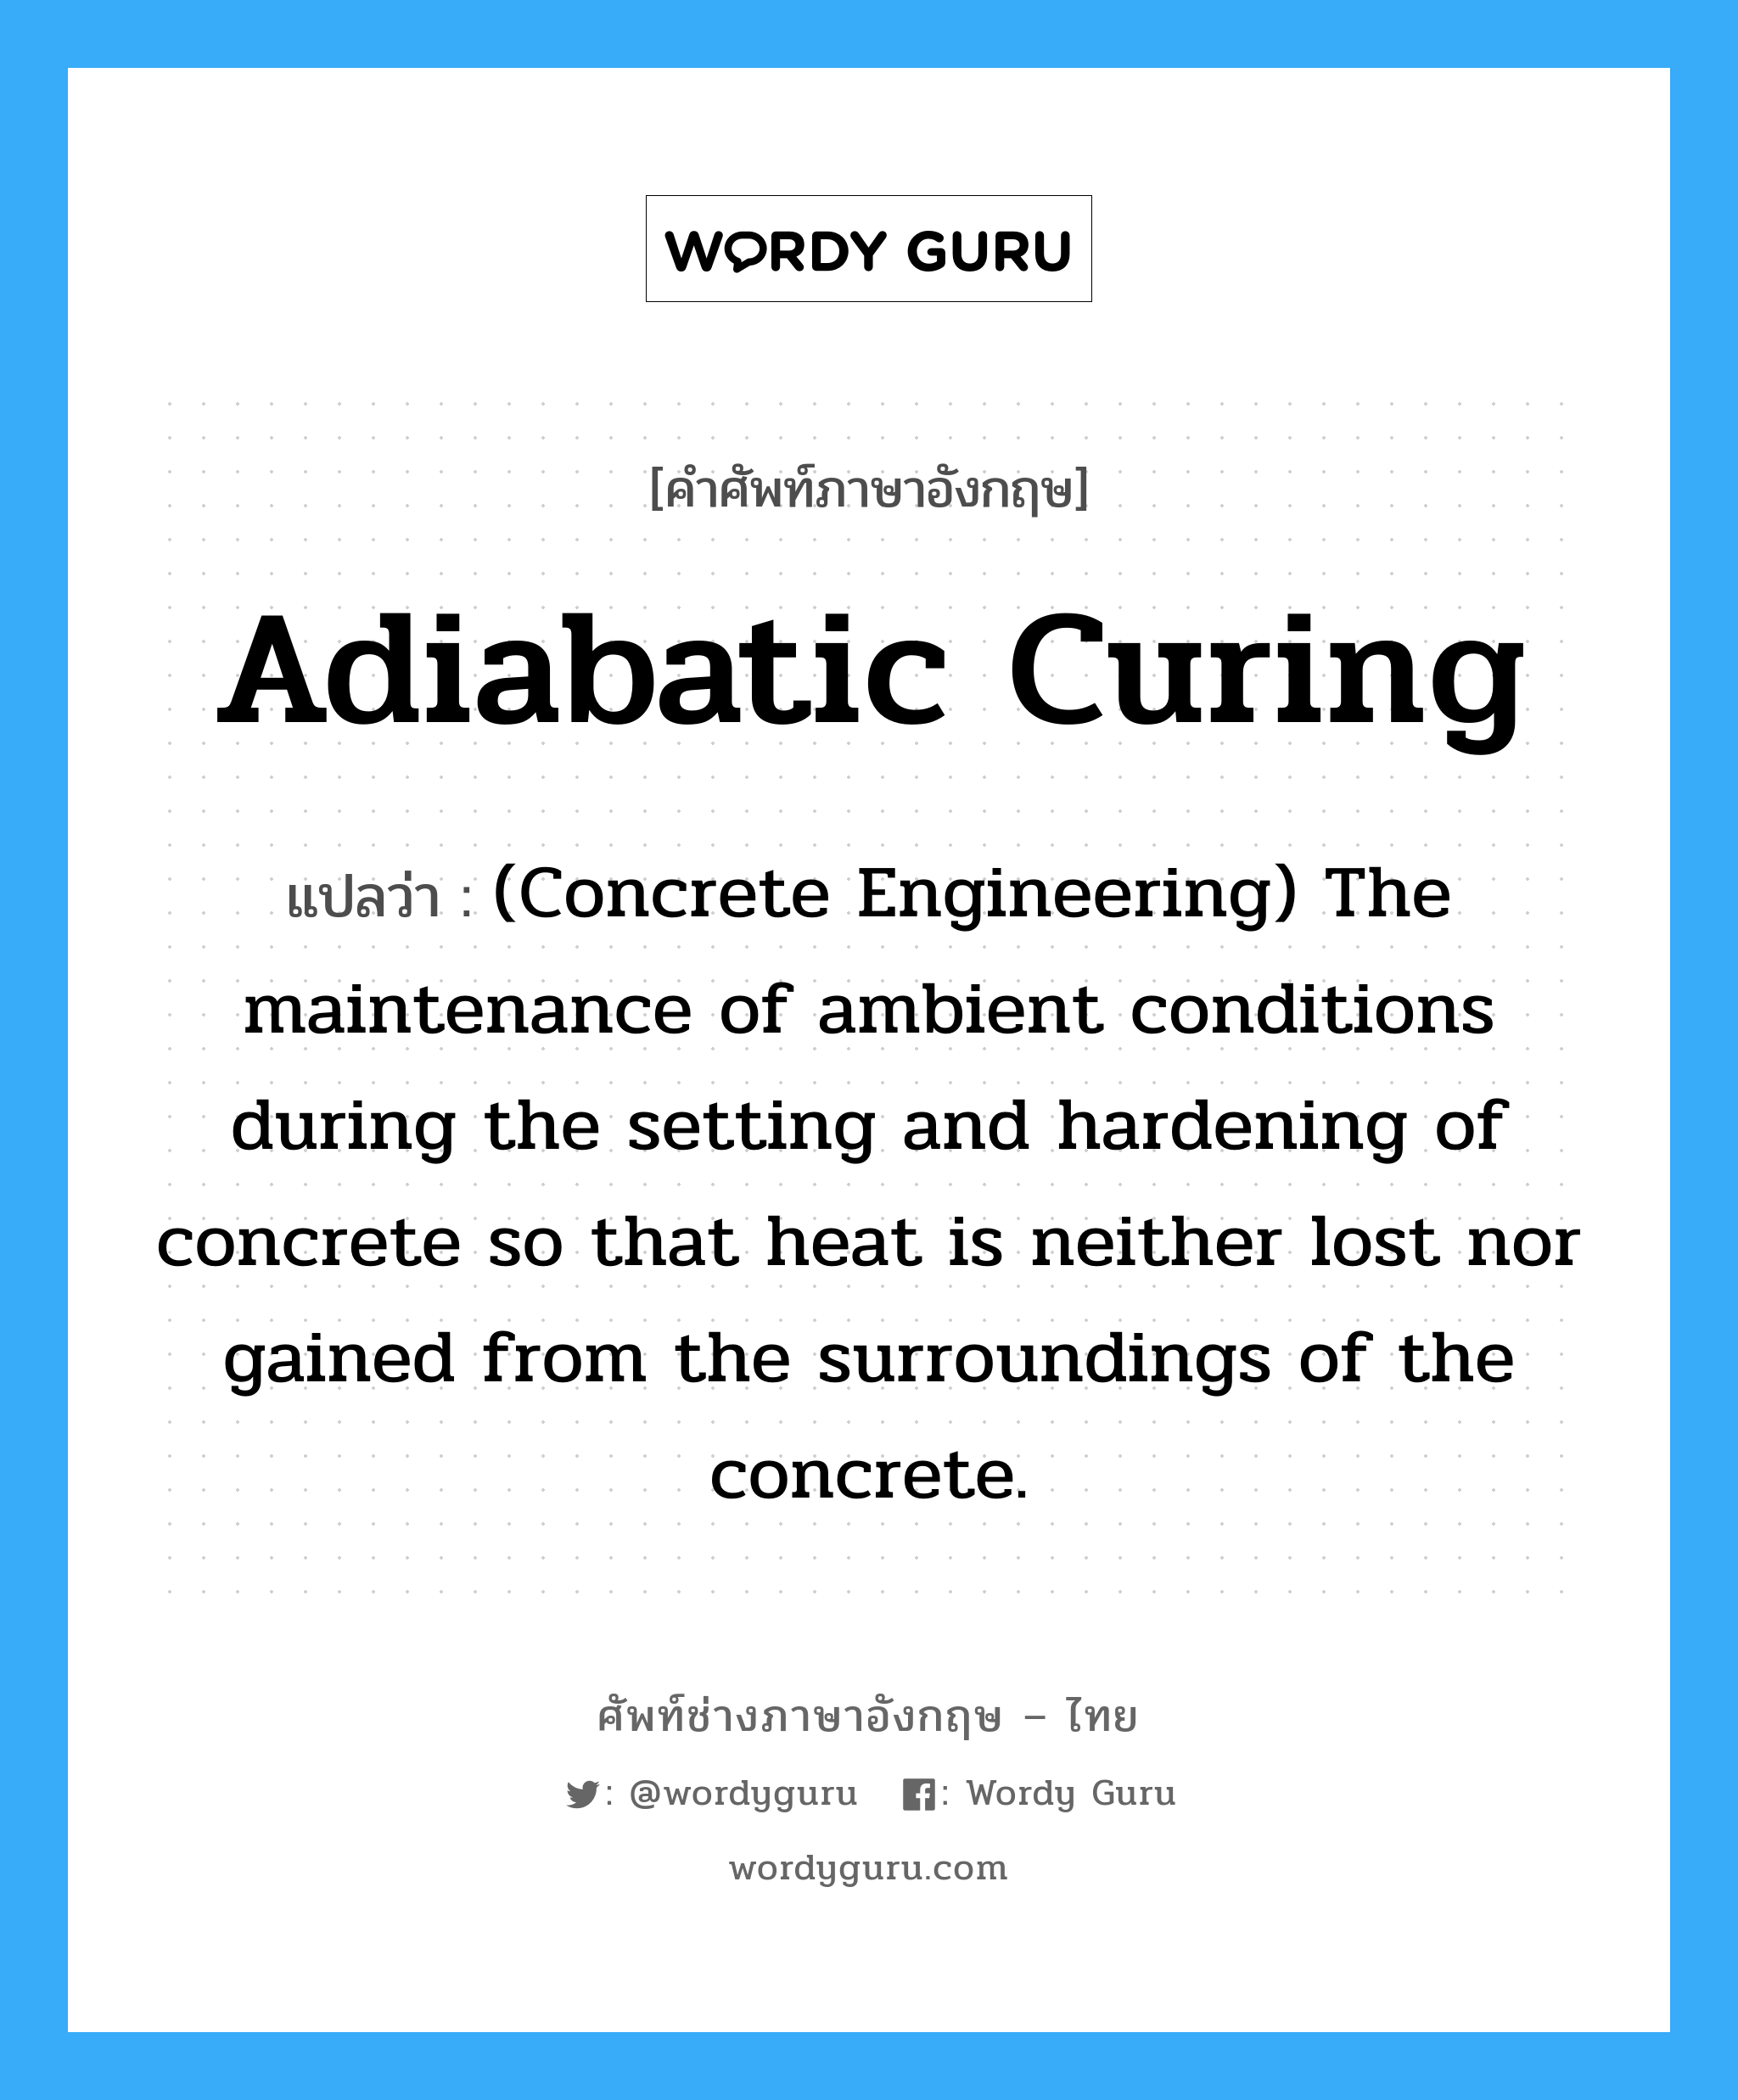 Adiabatic Curing แปลว่า?, คำศัพท์ช่างภาษาอังกฤษ - ไทย Adiabatic Curing คำศัพท์ภาษาอังกฤษ Adiabatic Curing แปลว่า (Concrete Engineering) The maintenance of ambient conditions during the setting and hardening of concrete so that heat is neither lost nor gained from the surroundings of the concrete.